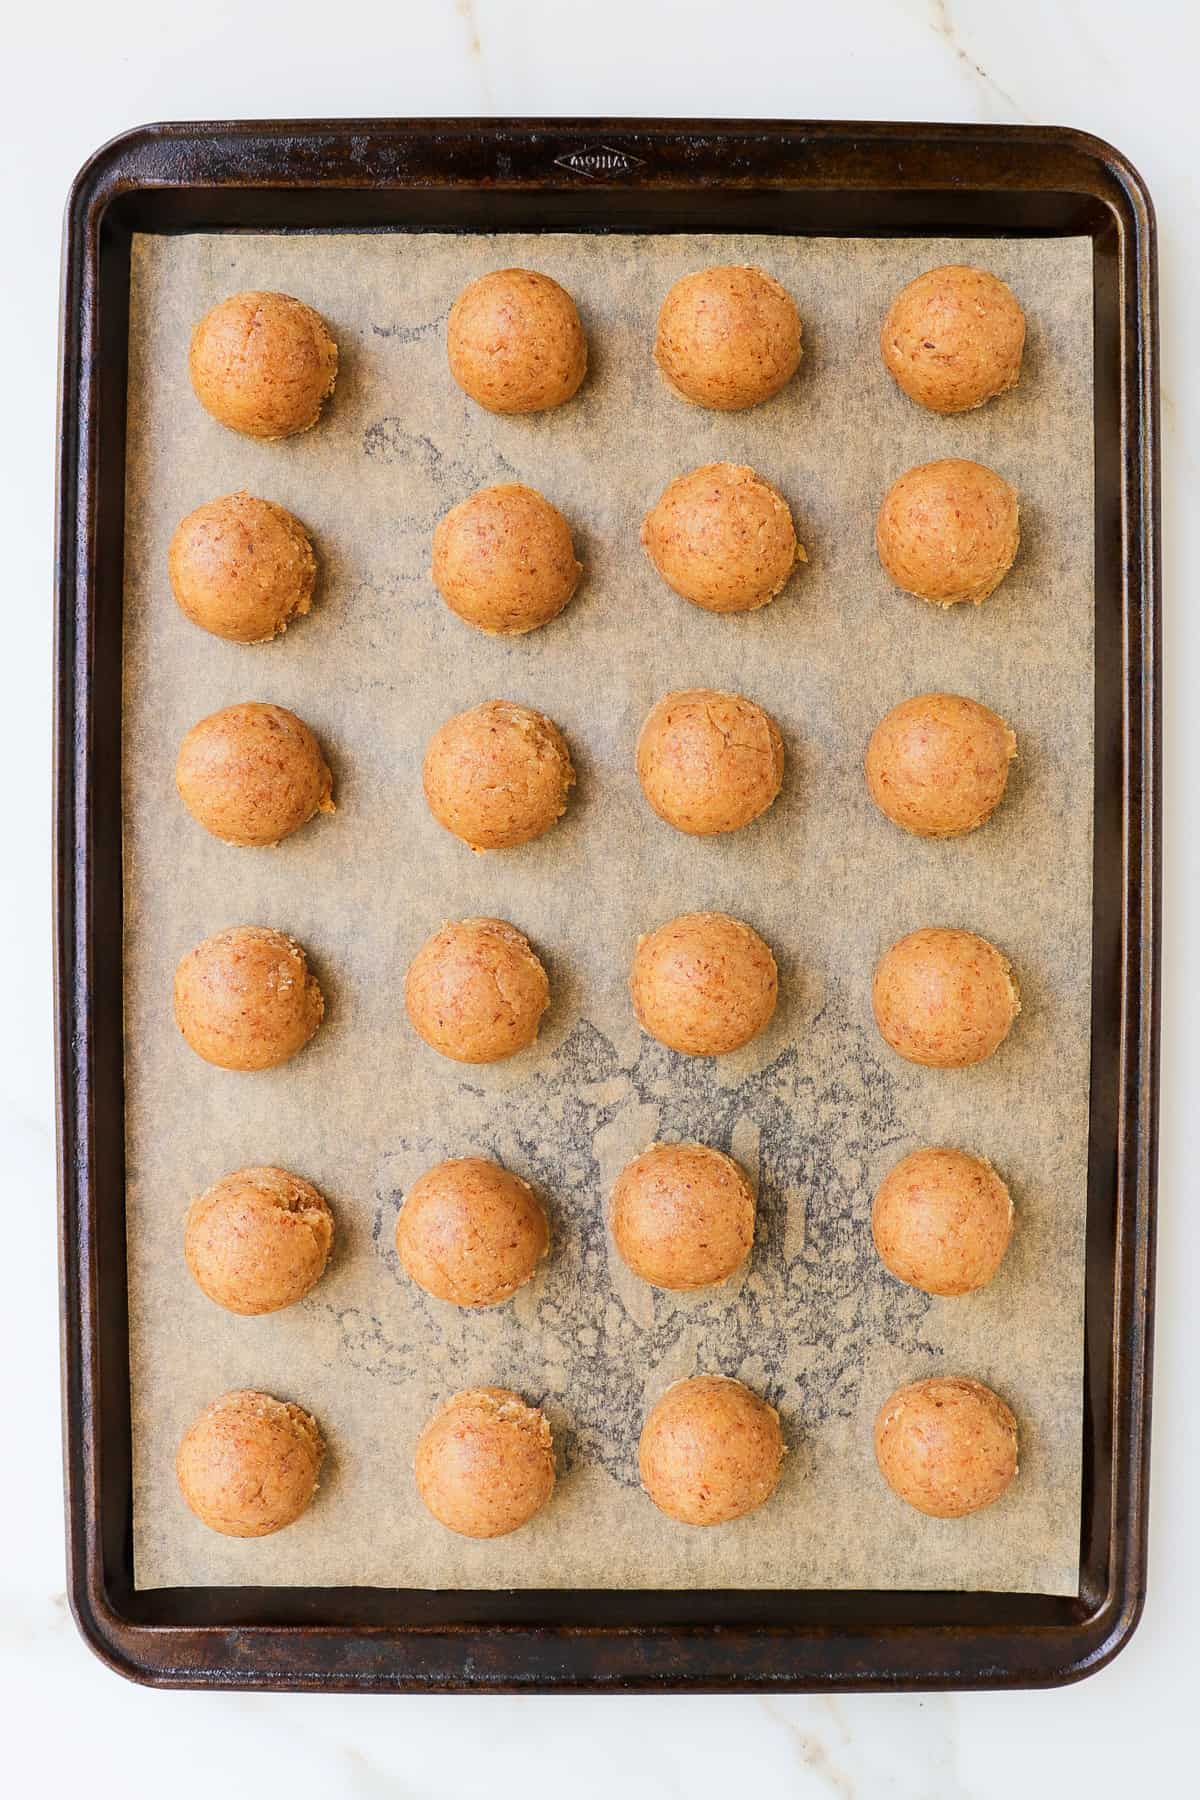 Cookie dough balls on baking tray.